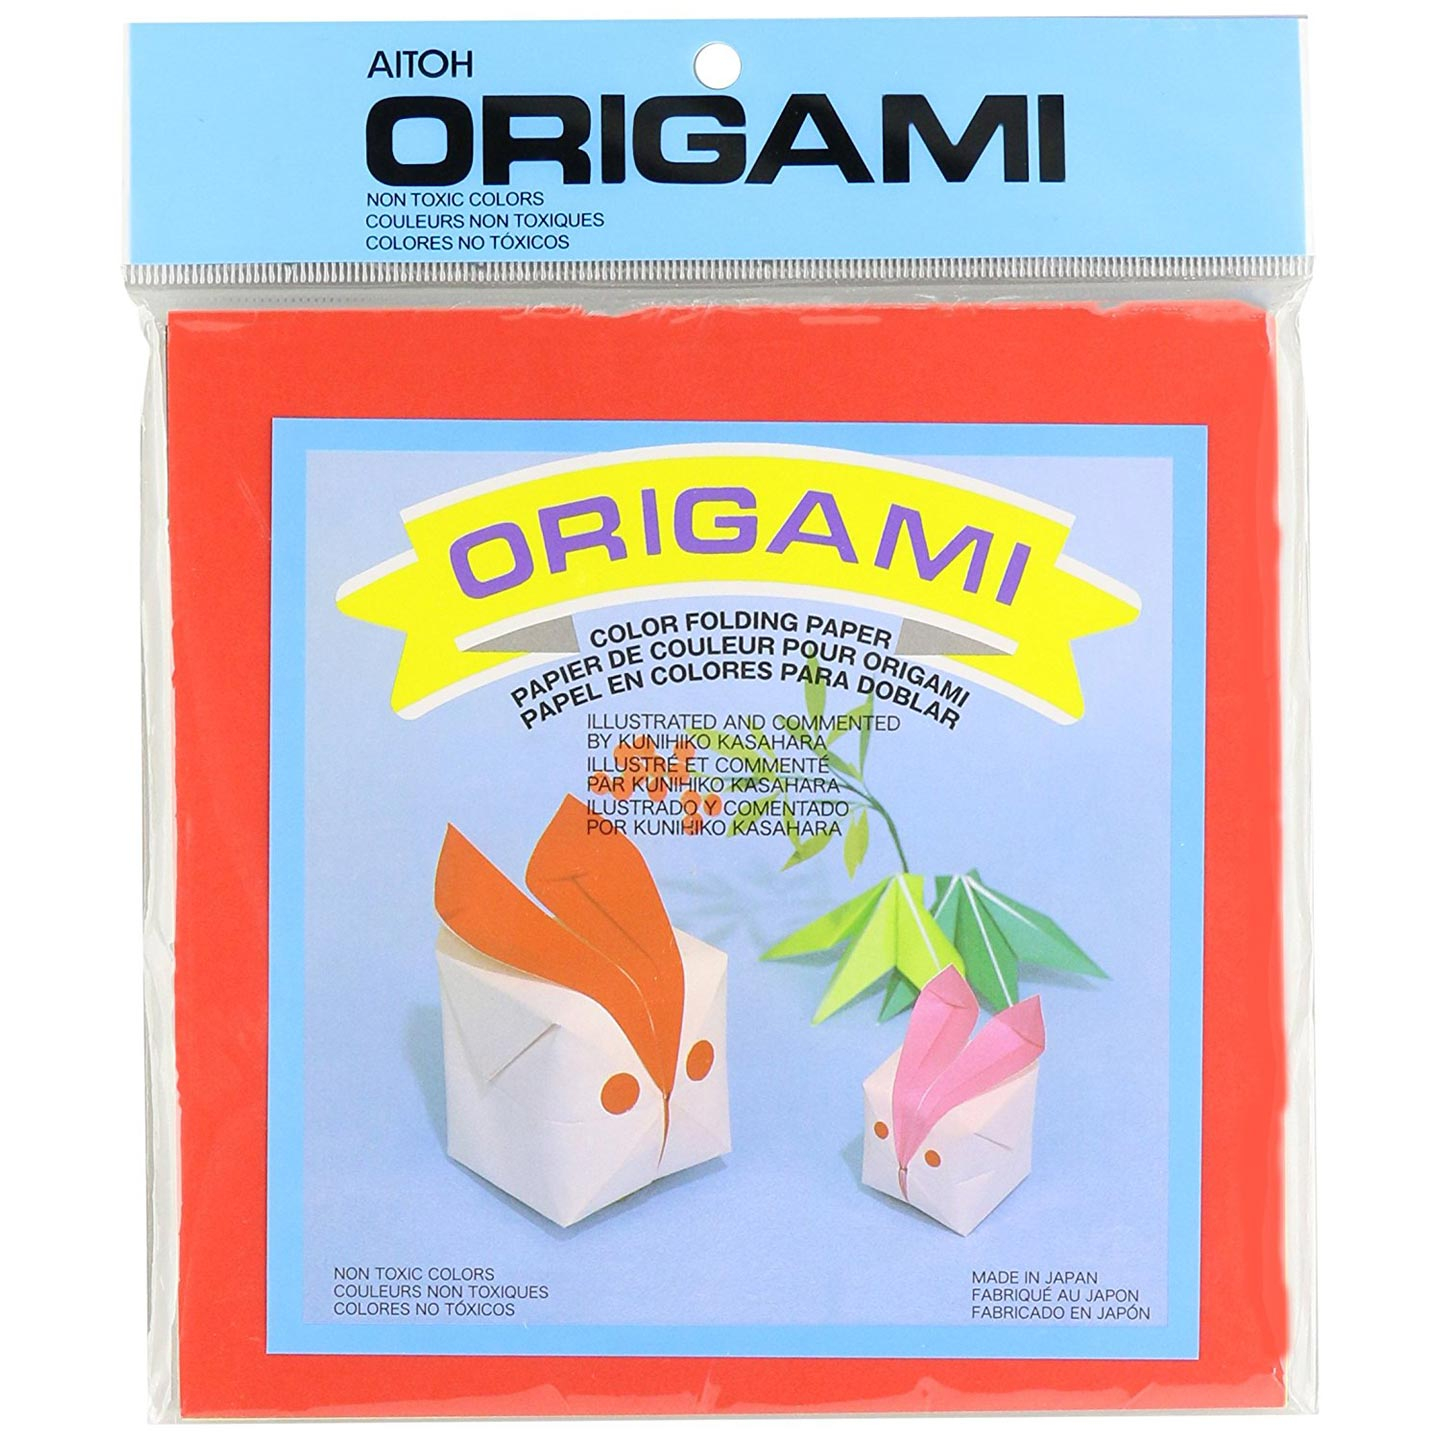 Aitoh Origami Paper Consumercrafts Product Aitoh Origami Paper 675 Inches 100 Sheets